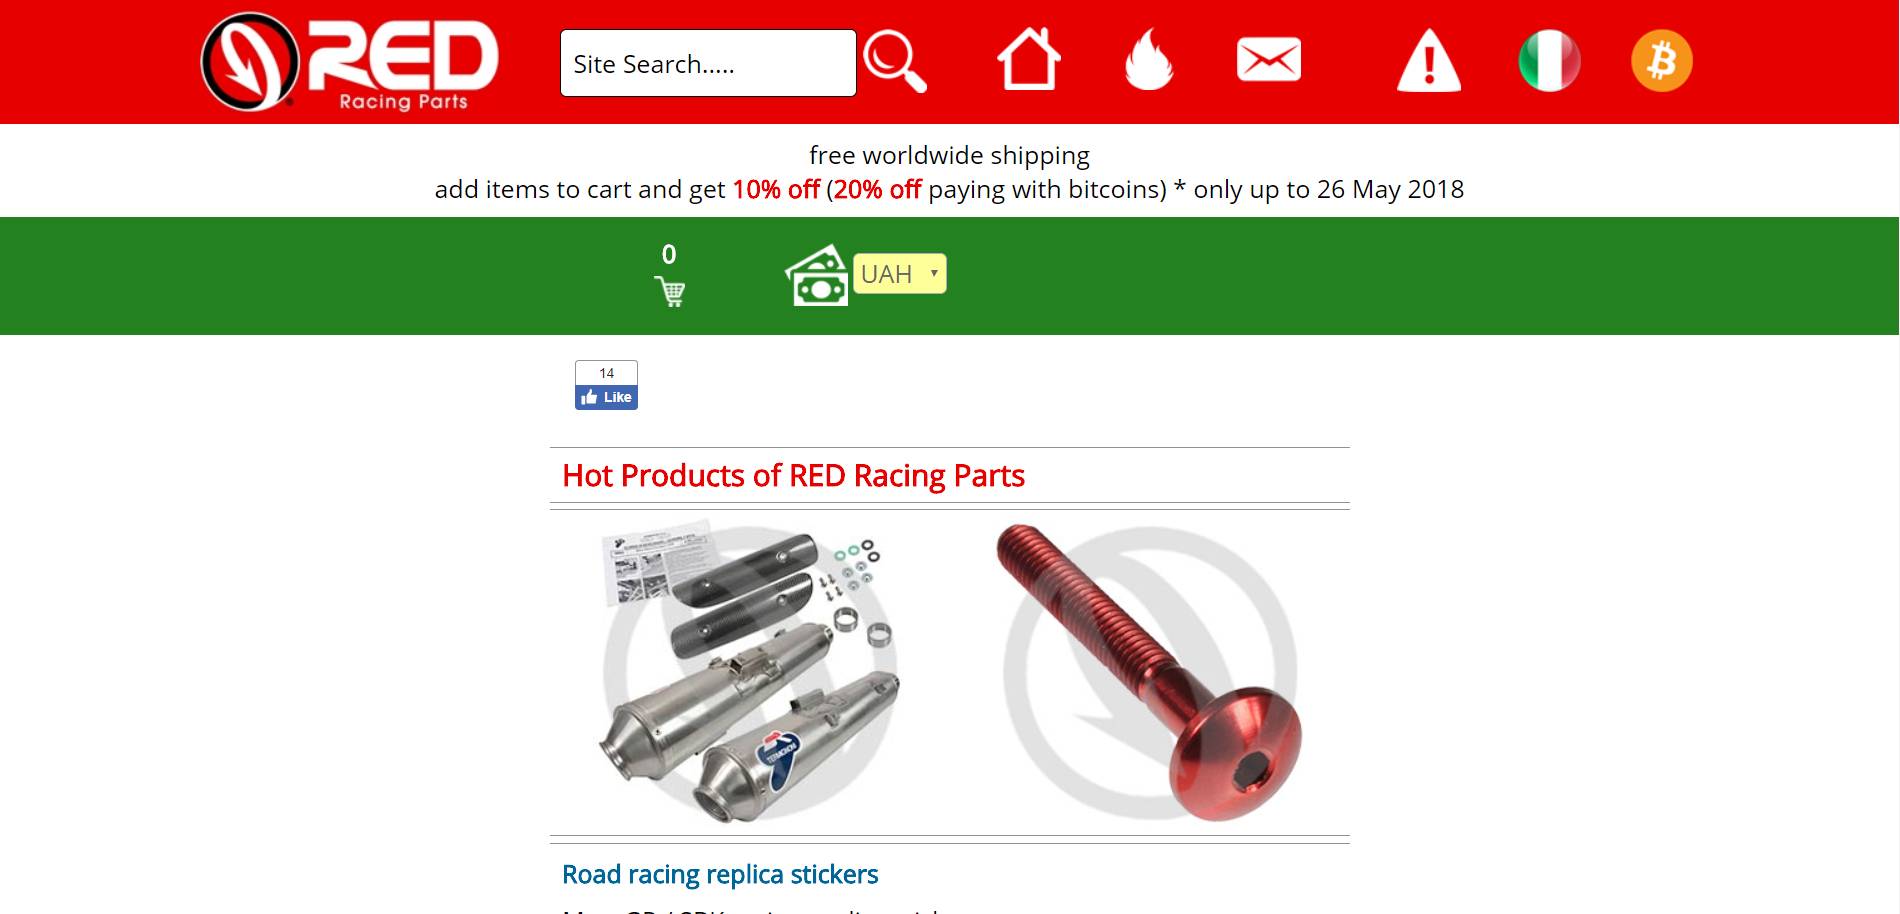 RED Racing Parts